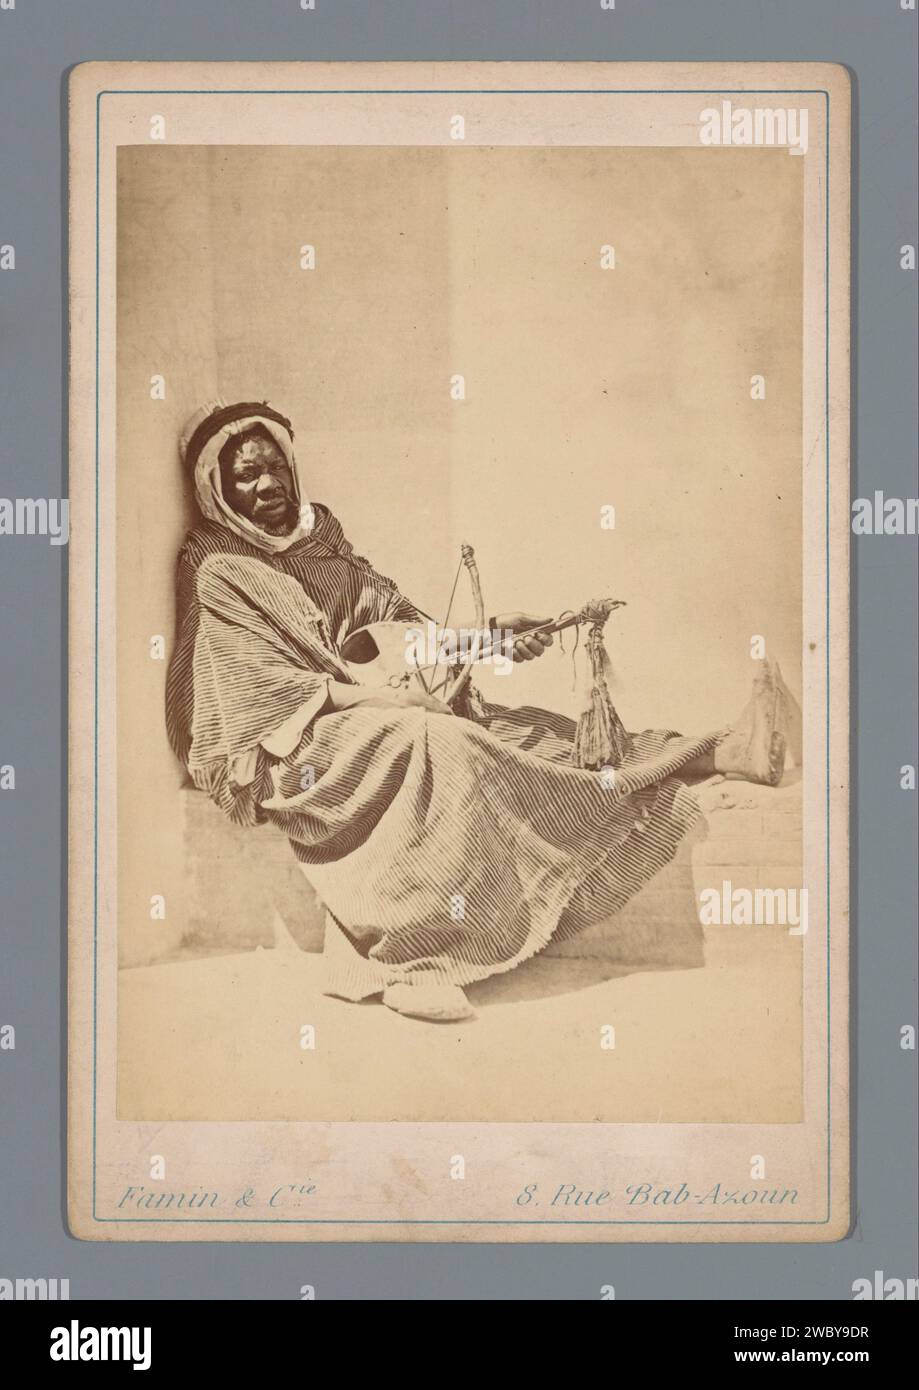 Black man with musical instrument, Famin et Cie., 1863 - 1889 cabinet photograph  Algeria cardboard. photographic support albumen print anonymous historical person portrayed. Africans. string instruments (bowed) Algeria Stock Photo